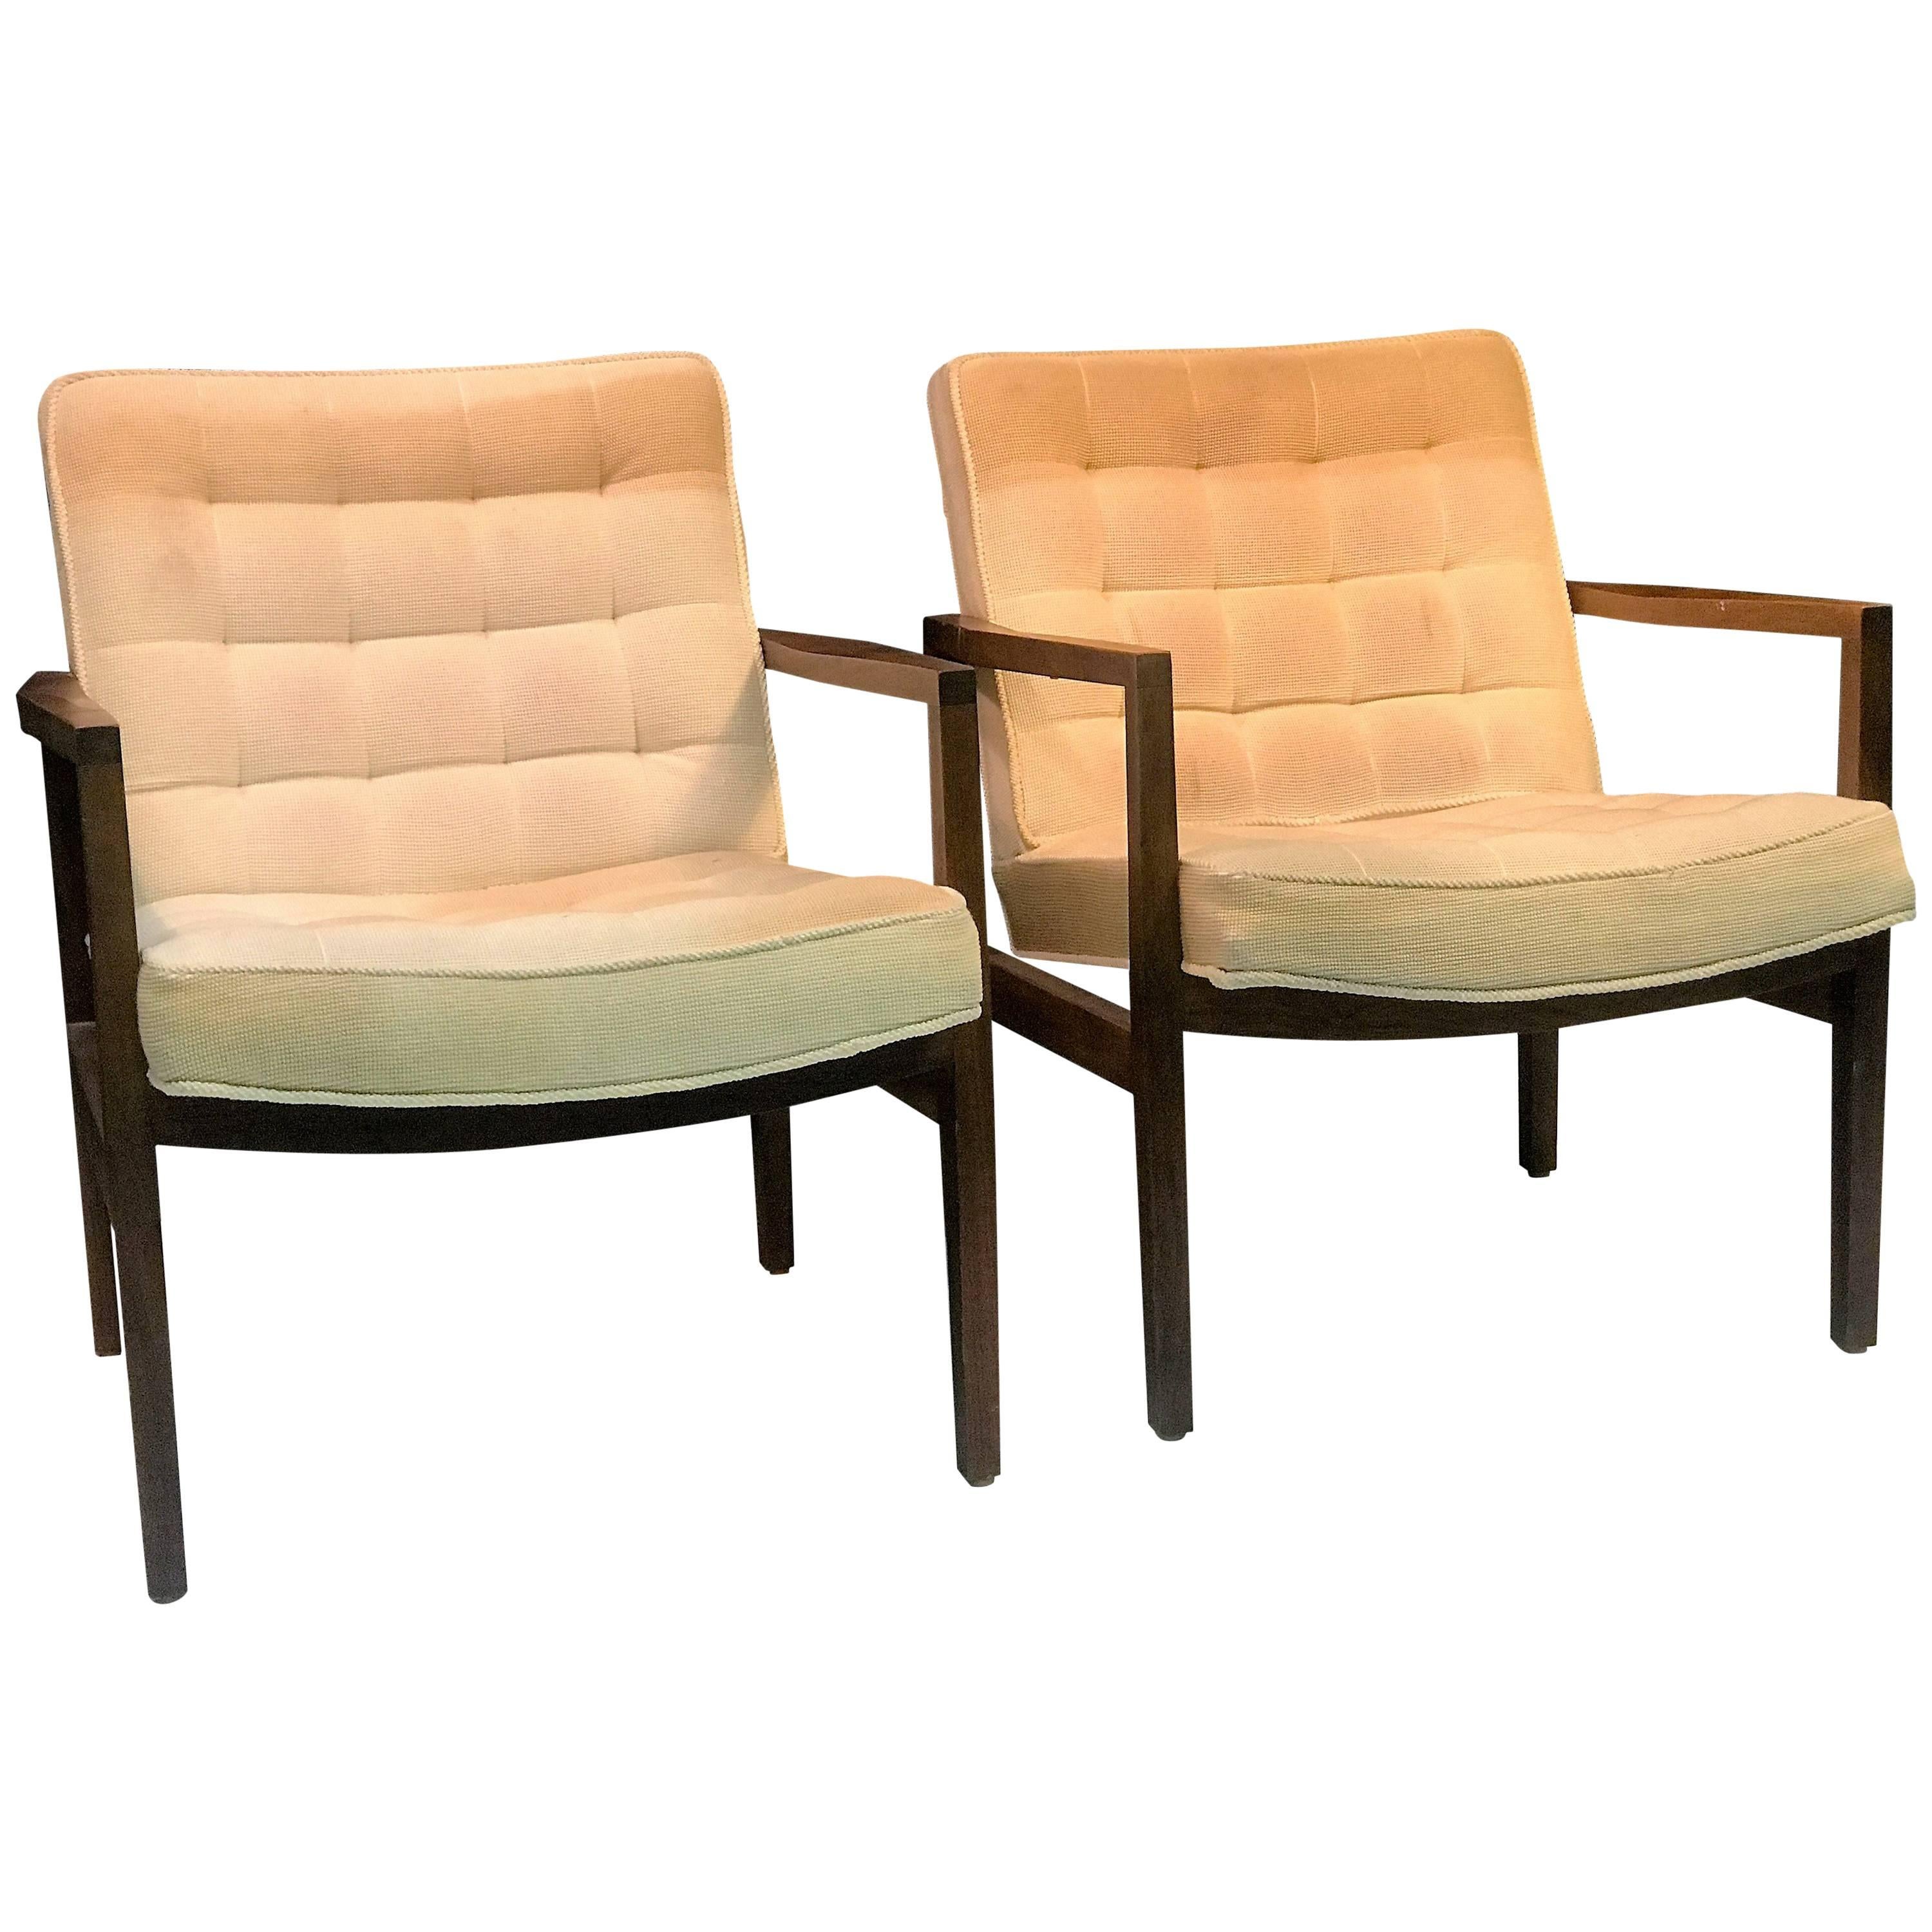 Sharp Pair of Mid-Century Modern Armchairs Attributed to Edward Wormley For Sale